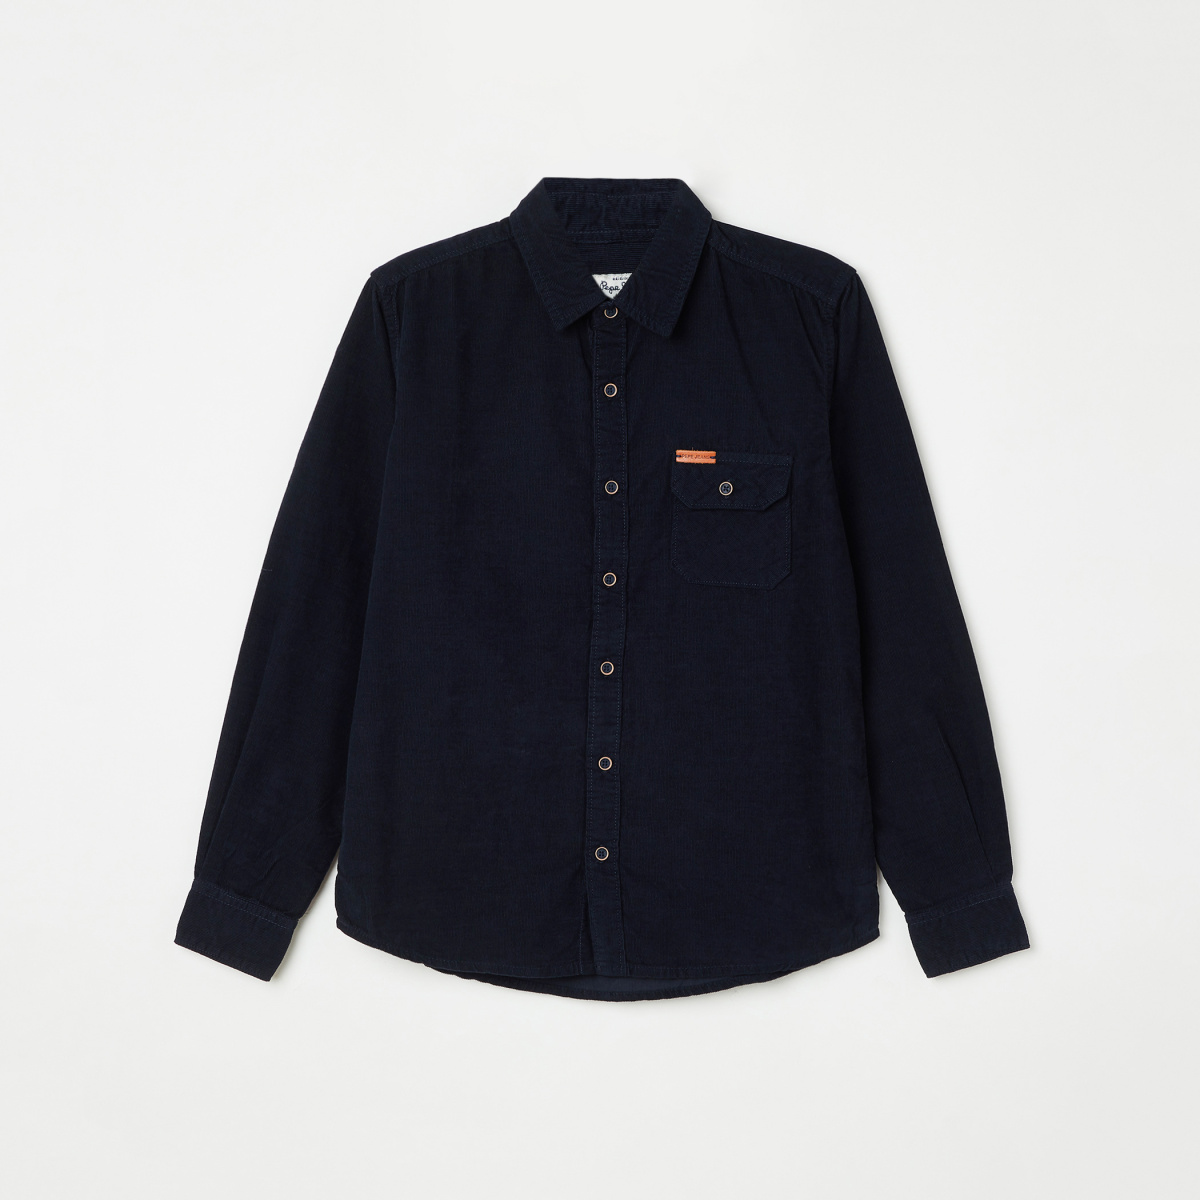 PEPE JEANS Solid Full Sleeves Shirt